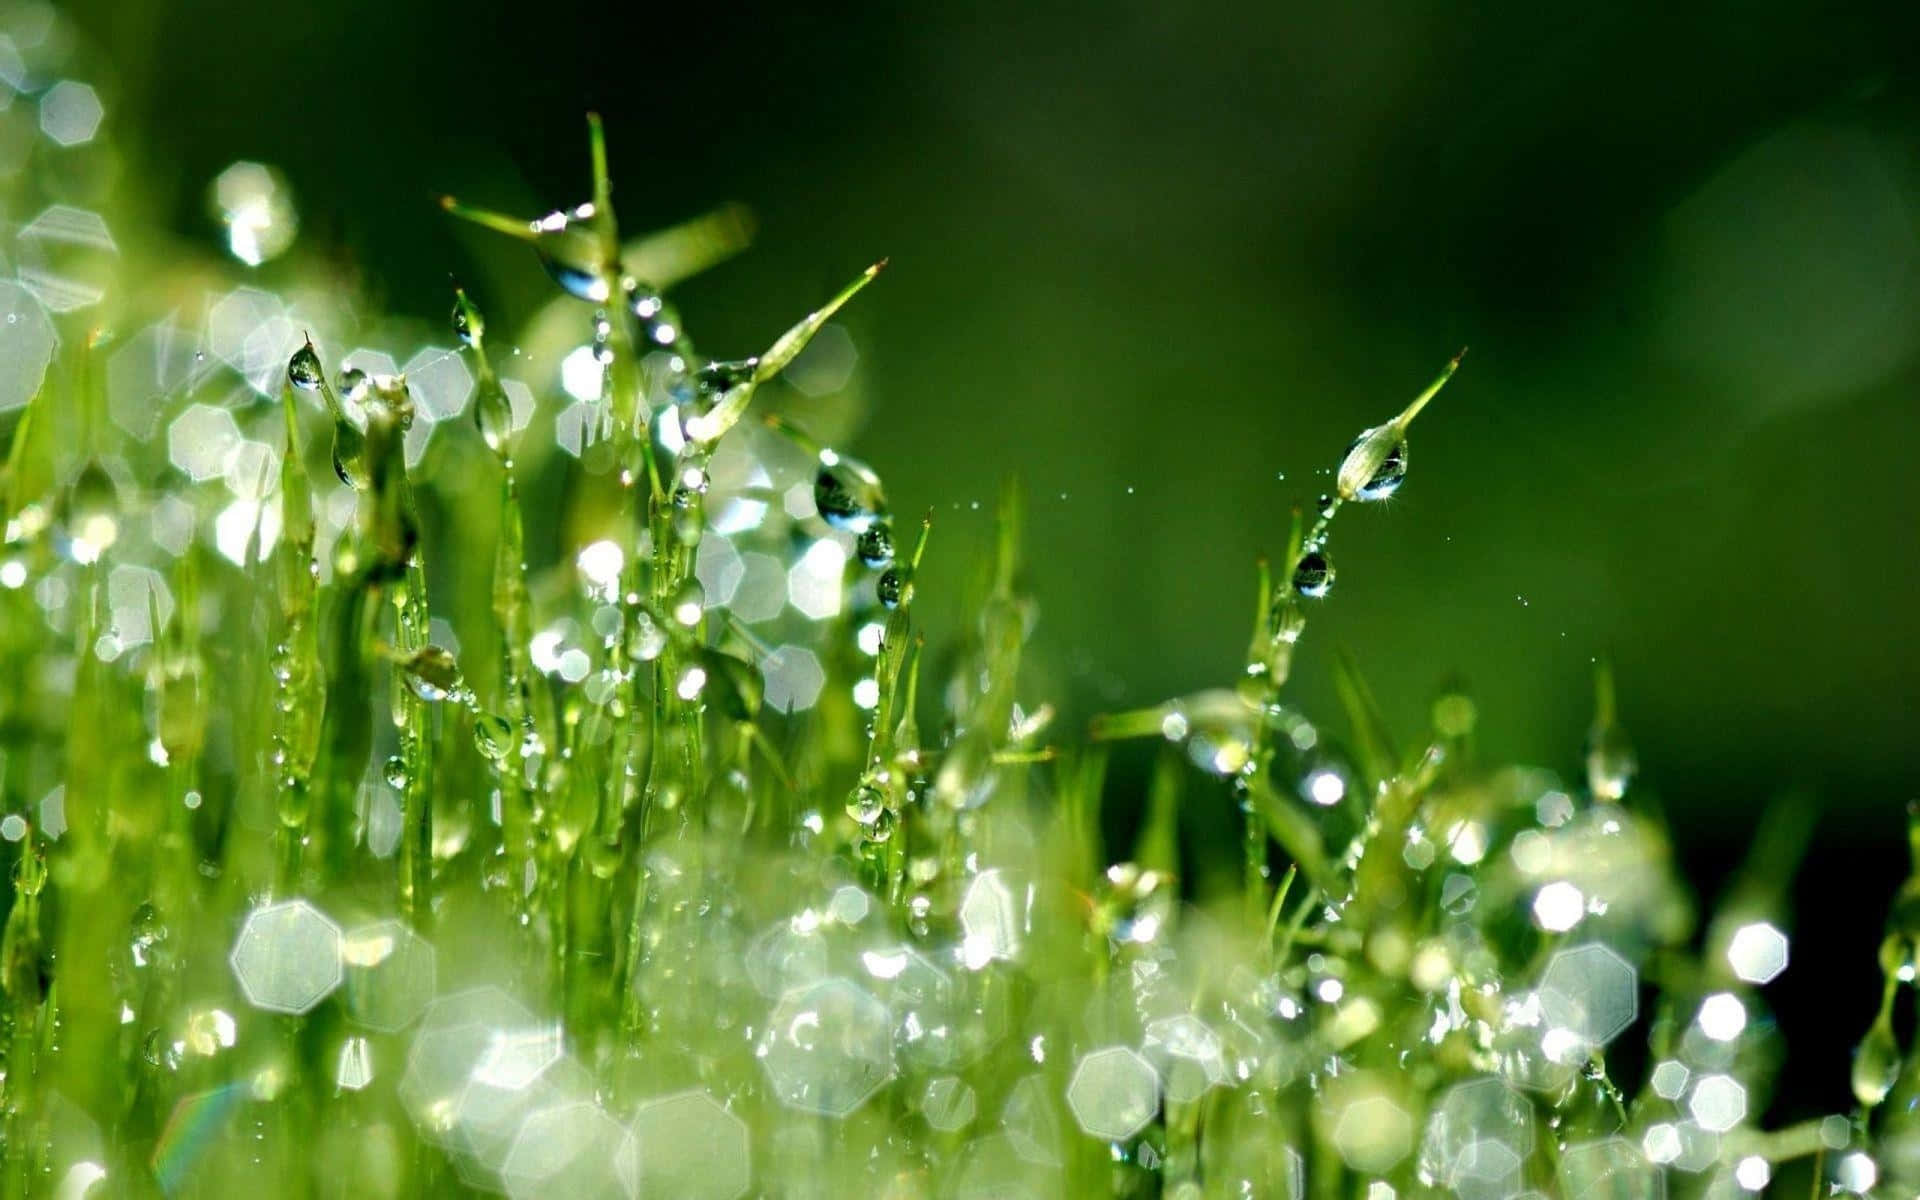 Grass With Water Droplets On It